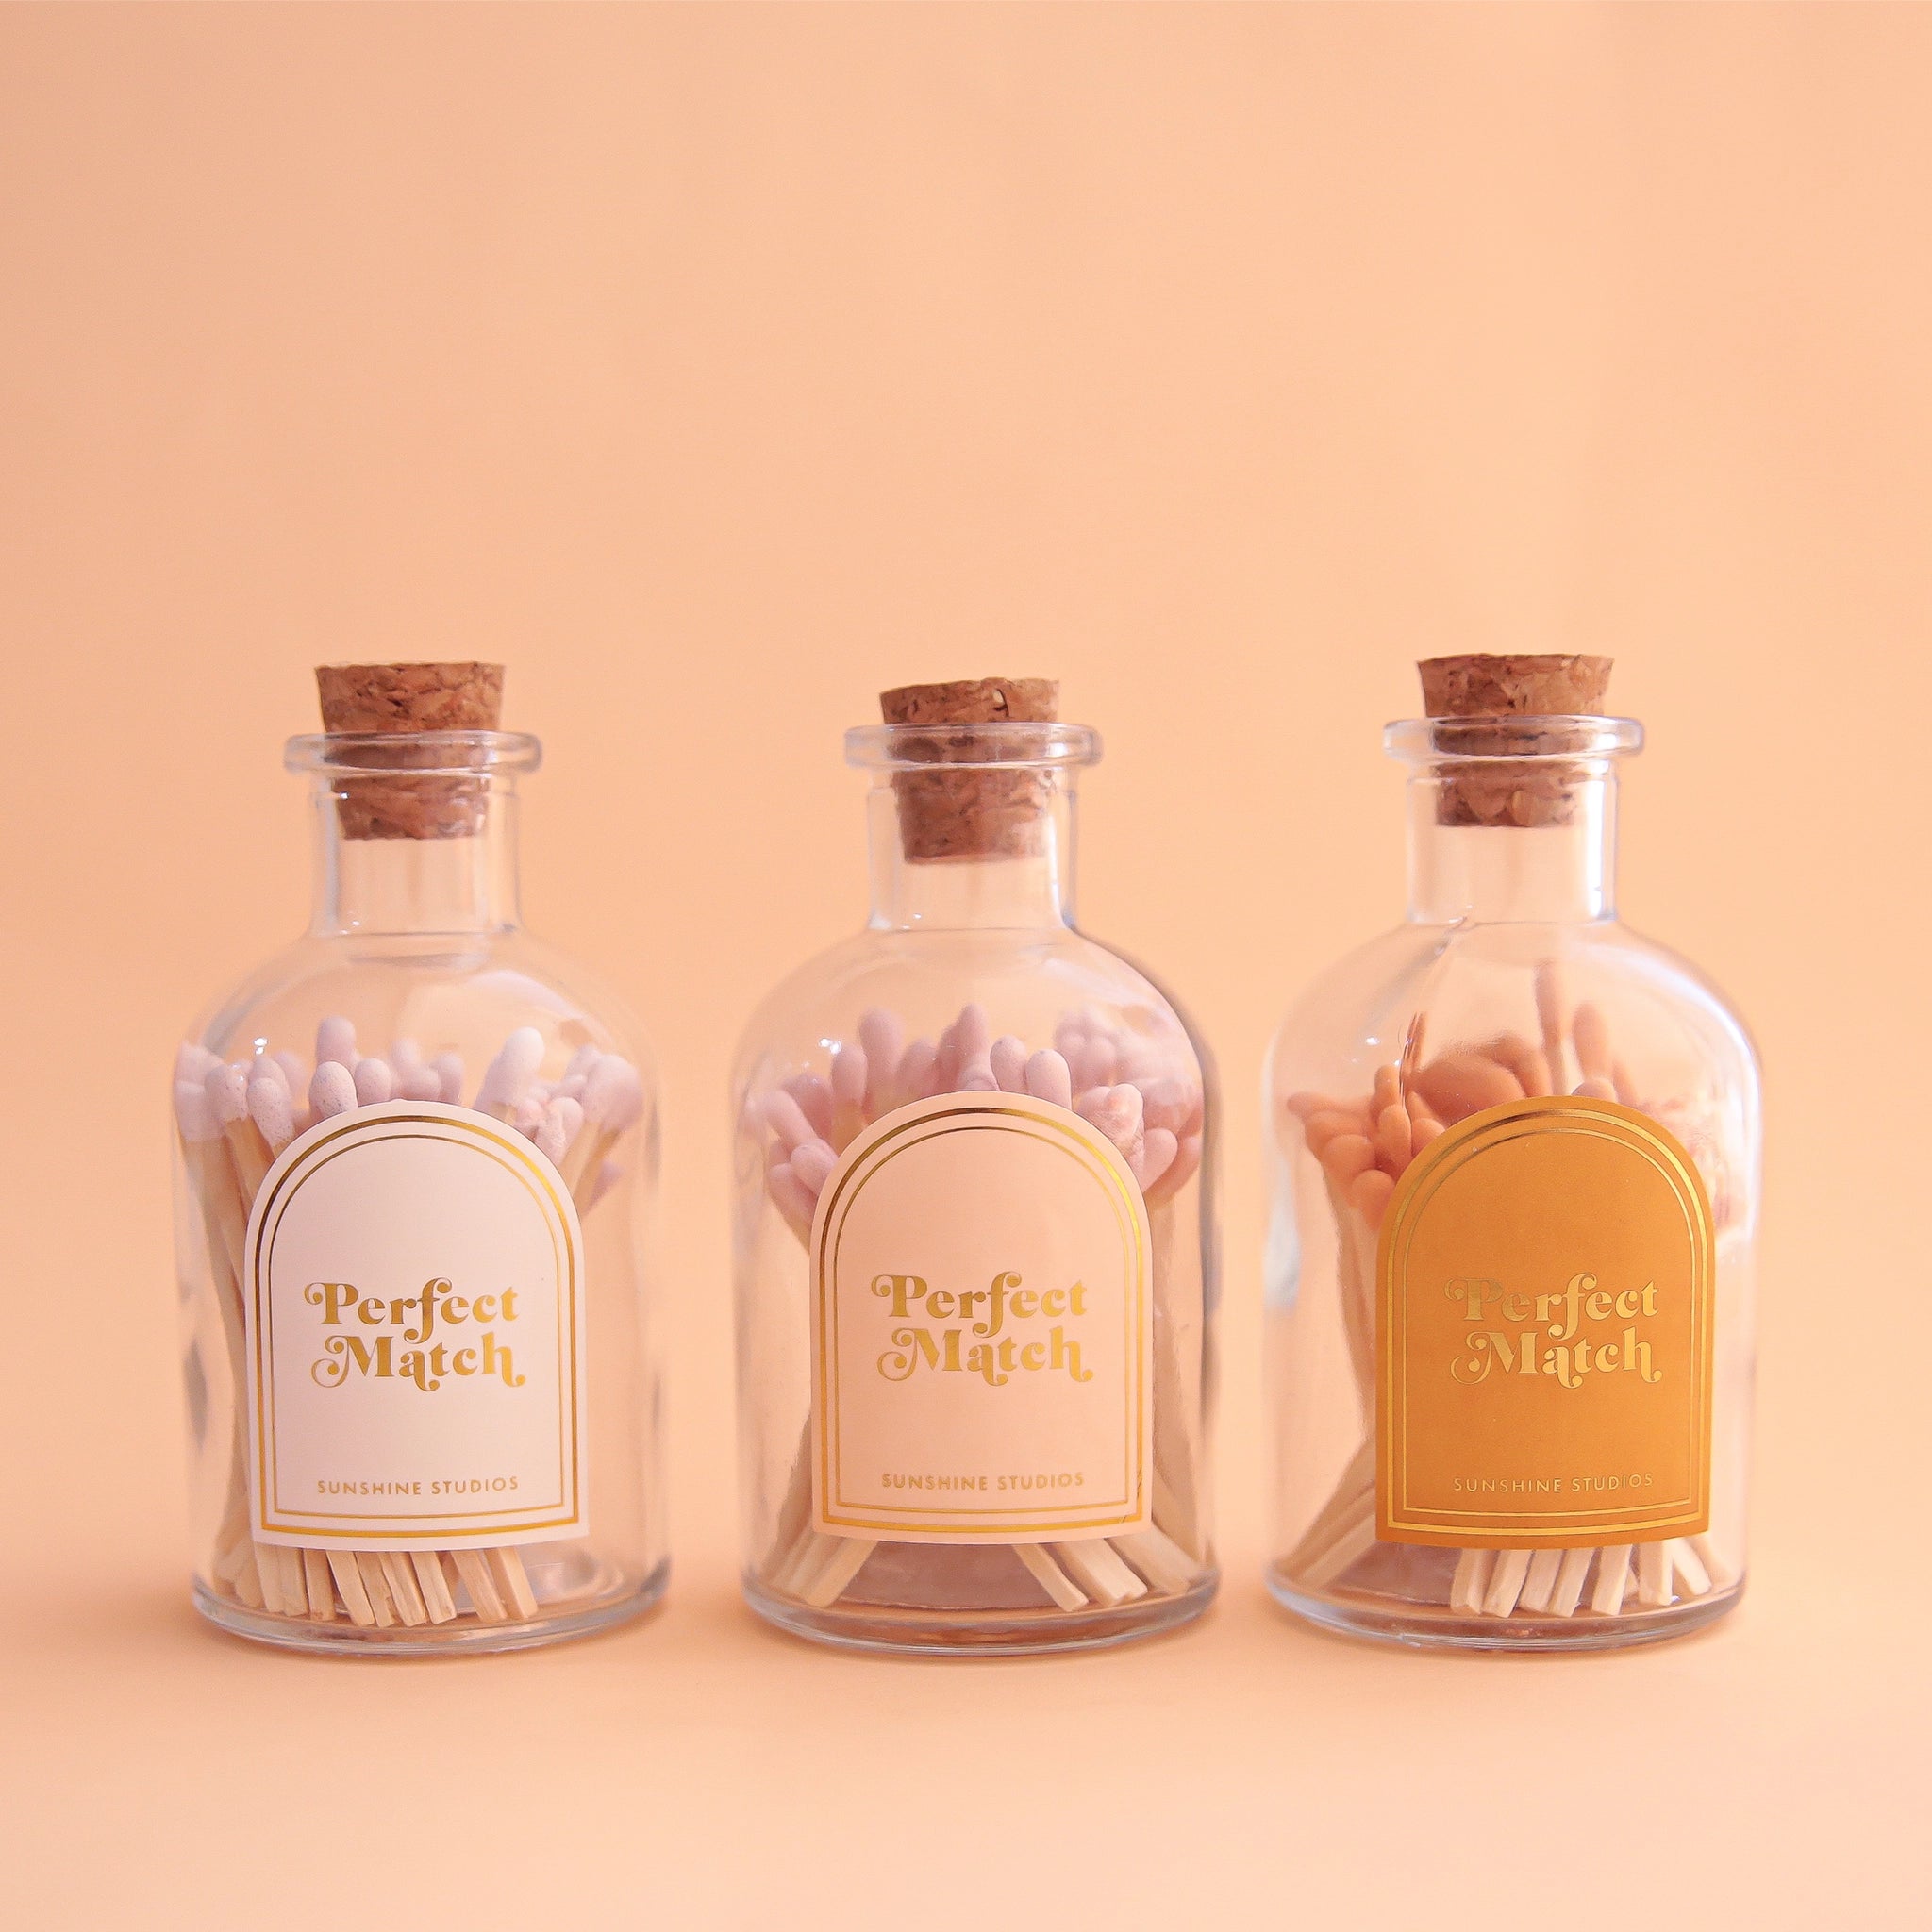 On a light peach background is three clear jars of wooden matches. Each label is a different color, there is a white, pink and golden/orange shade.